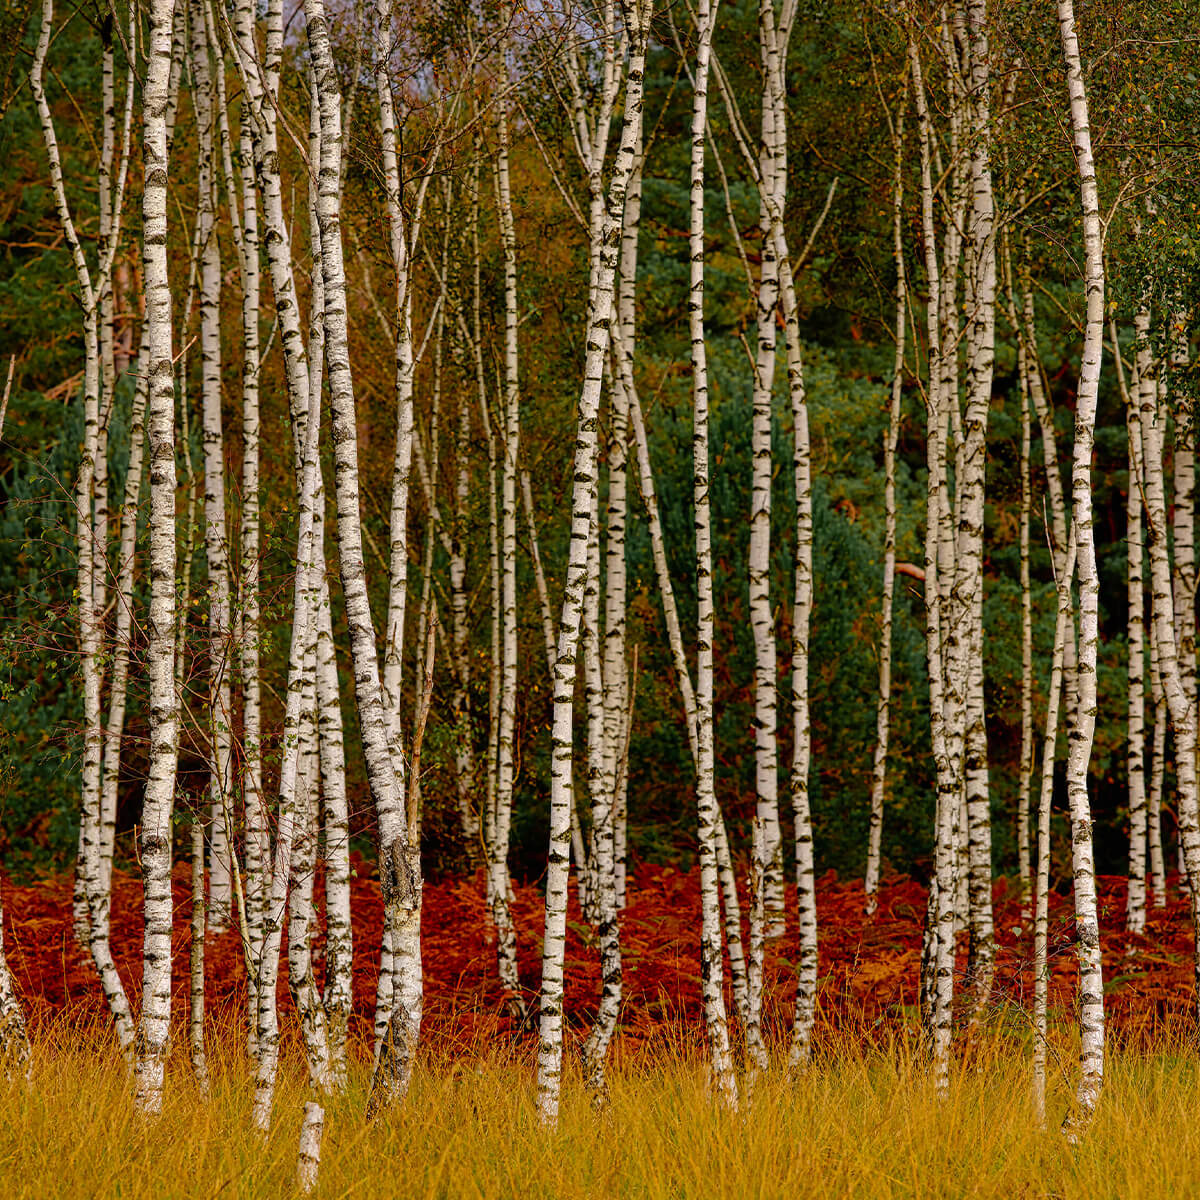 Birch trees at the edge of the forest